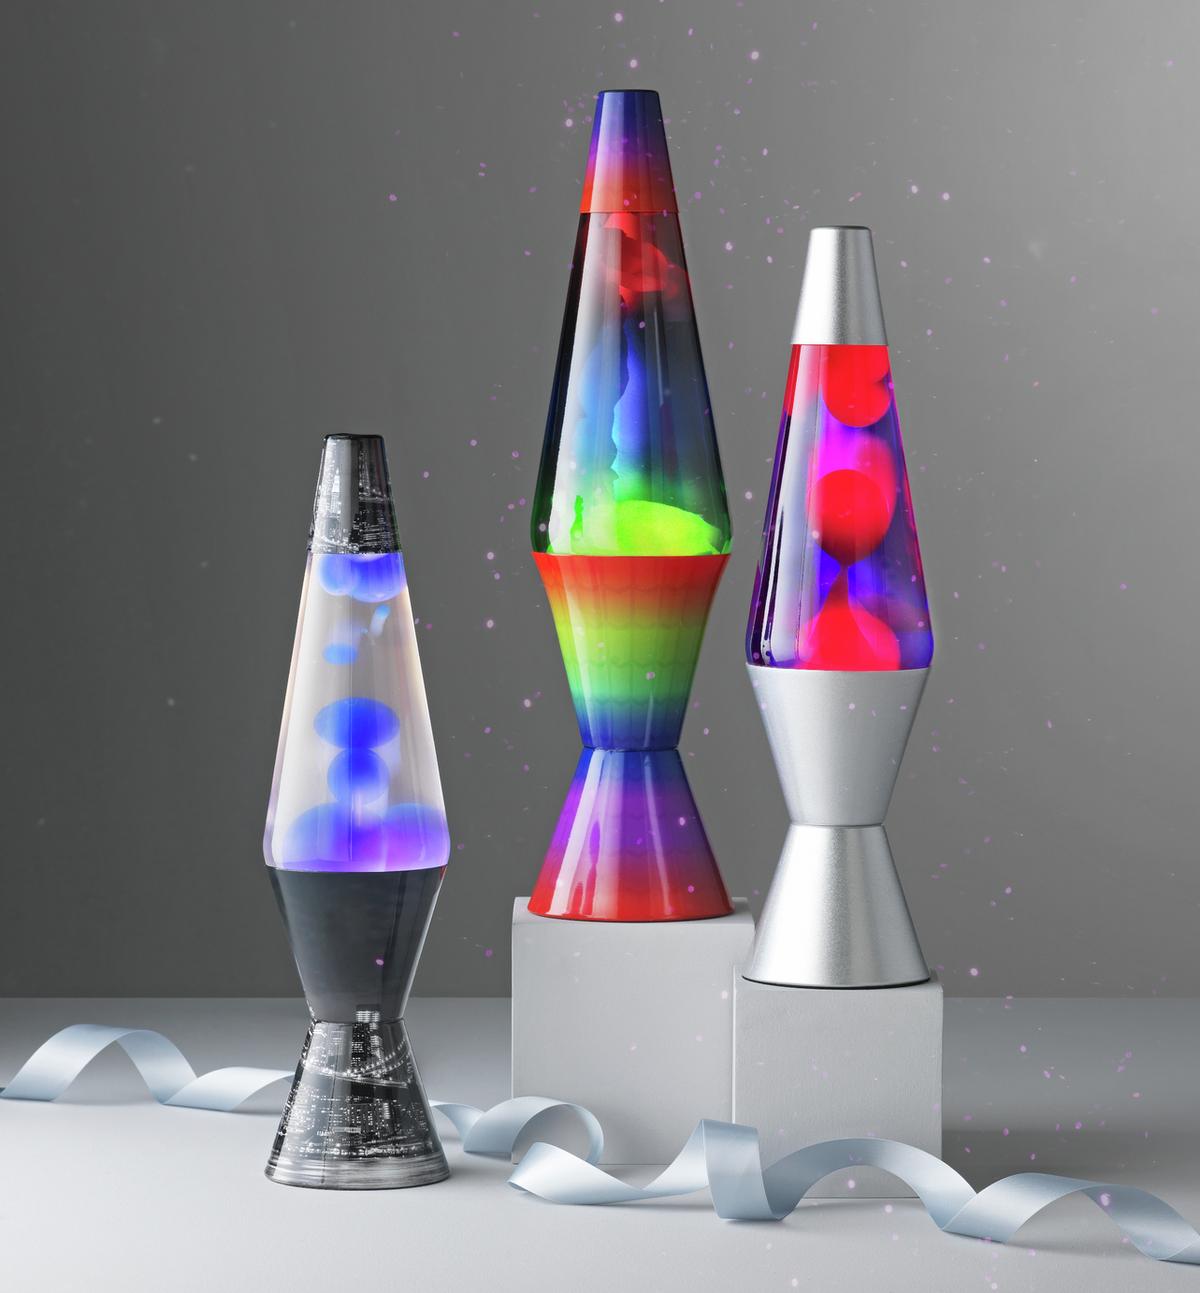 A group of 3 different lava lamps.